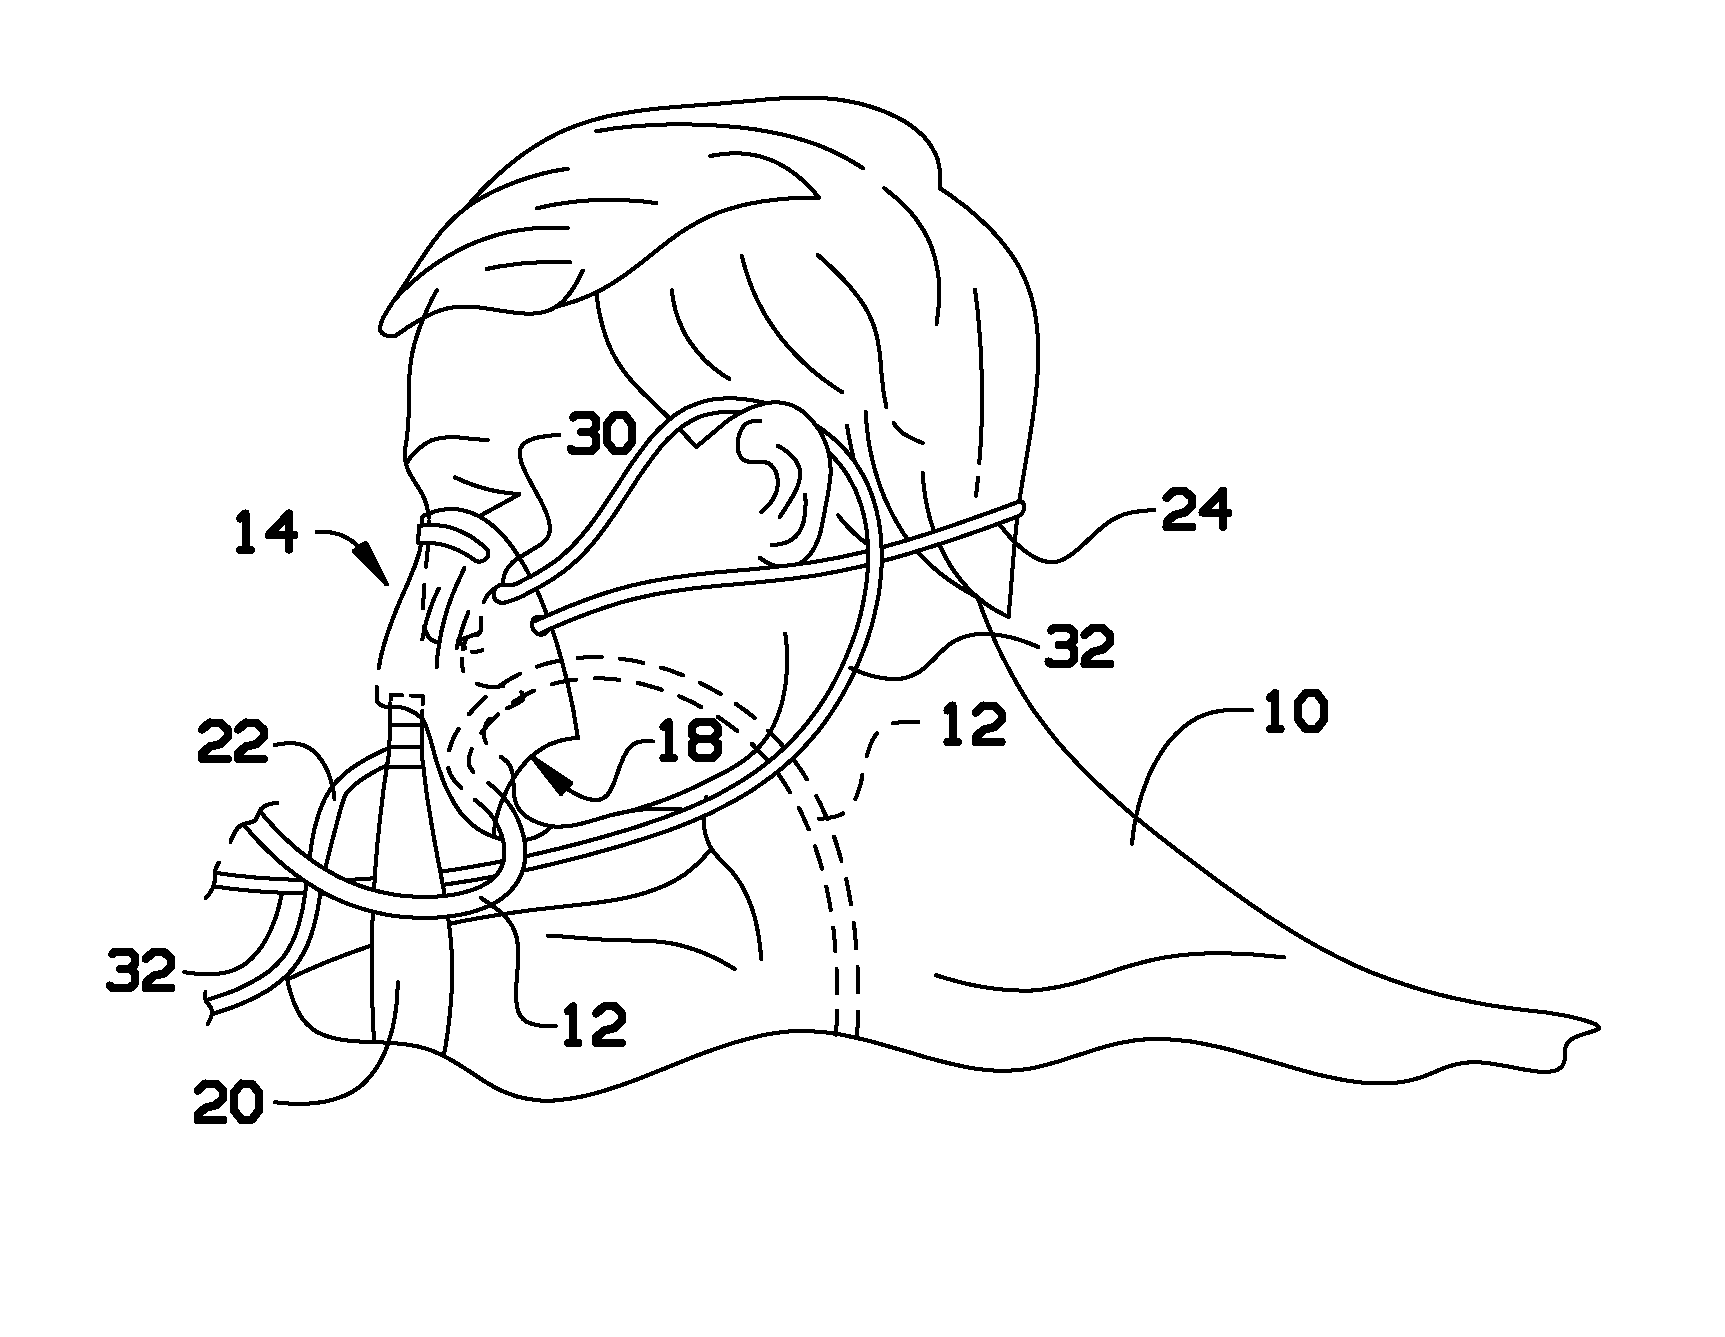 Oxygen face mask with capnometer and side port